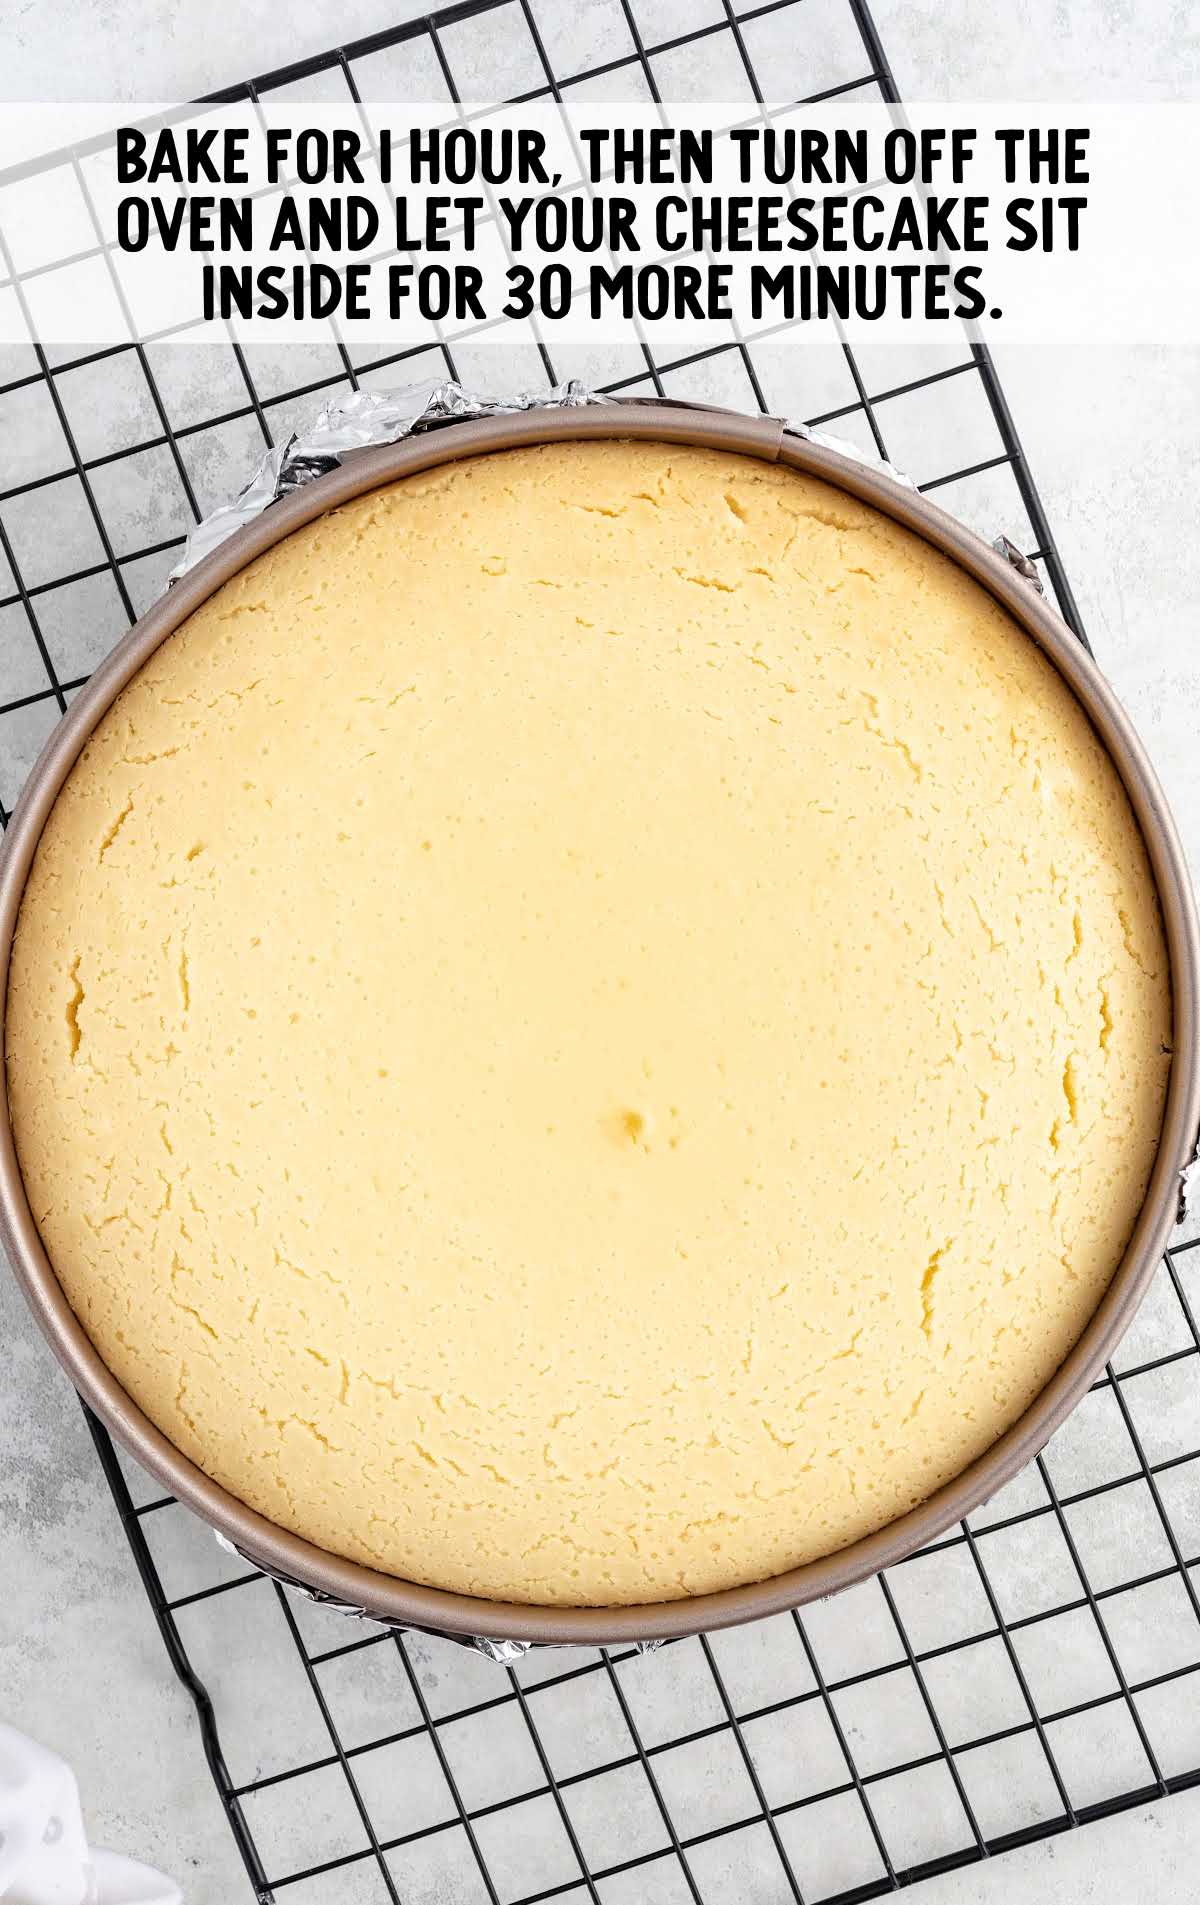 bake cheesecake for an hour and let sit for 30 minutes